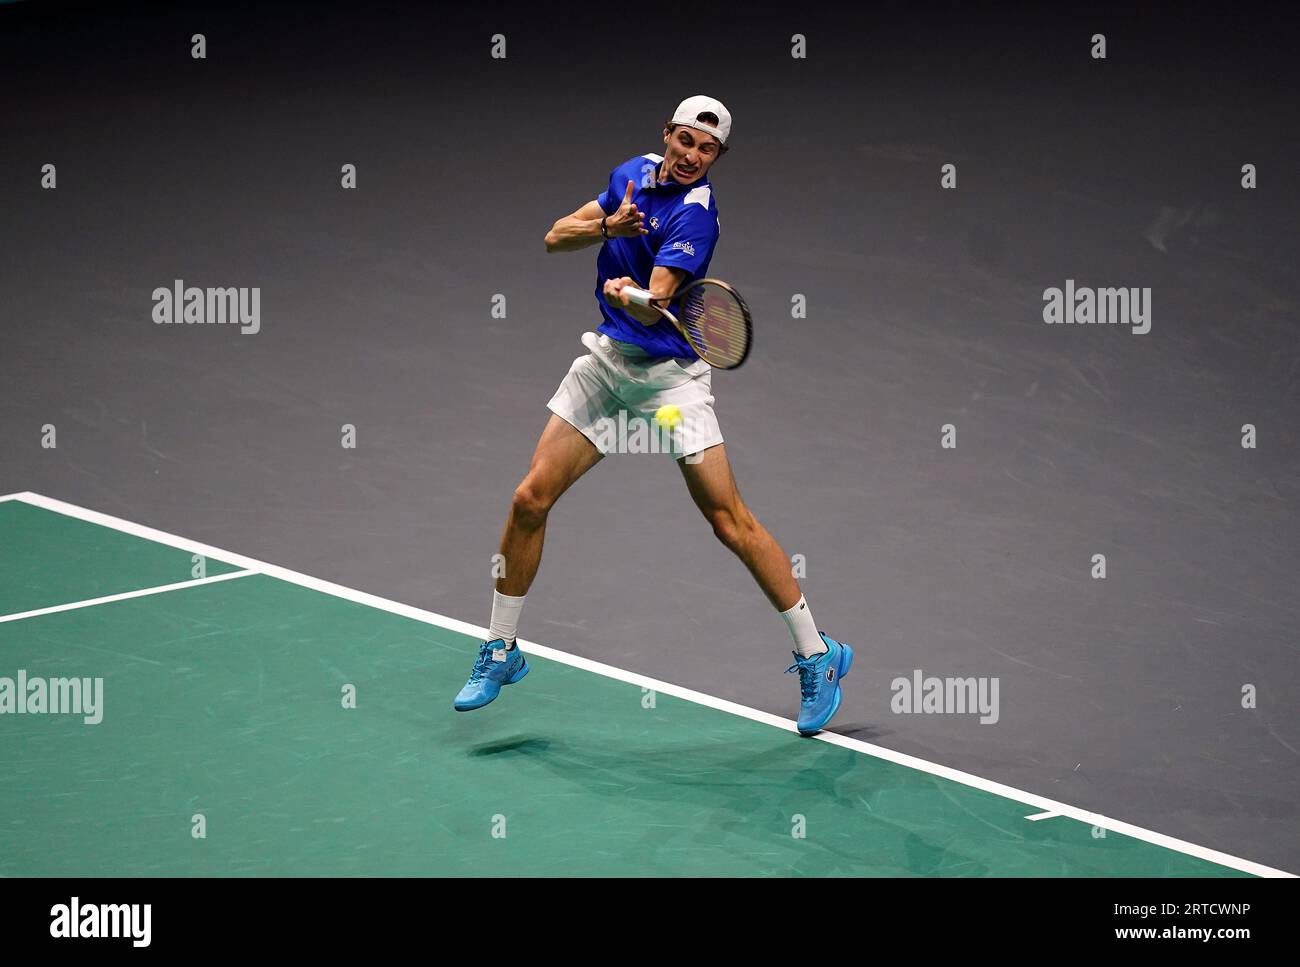 France's Ugo Humbert in action against Switzerland's Stan Wawrinka (not pictured) during the Davis Cup group stage match at the AO Arena, Manchester. Picture date: Tuesday September 12, 2023. Stock Photo